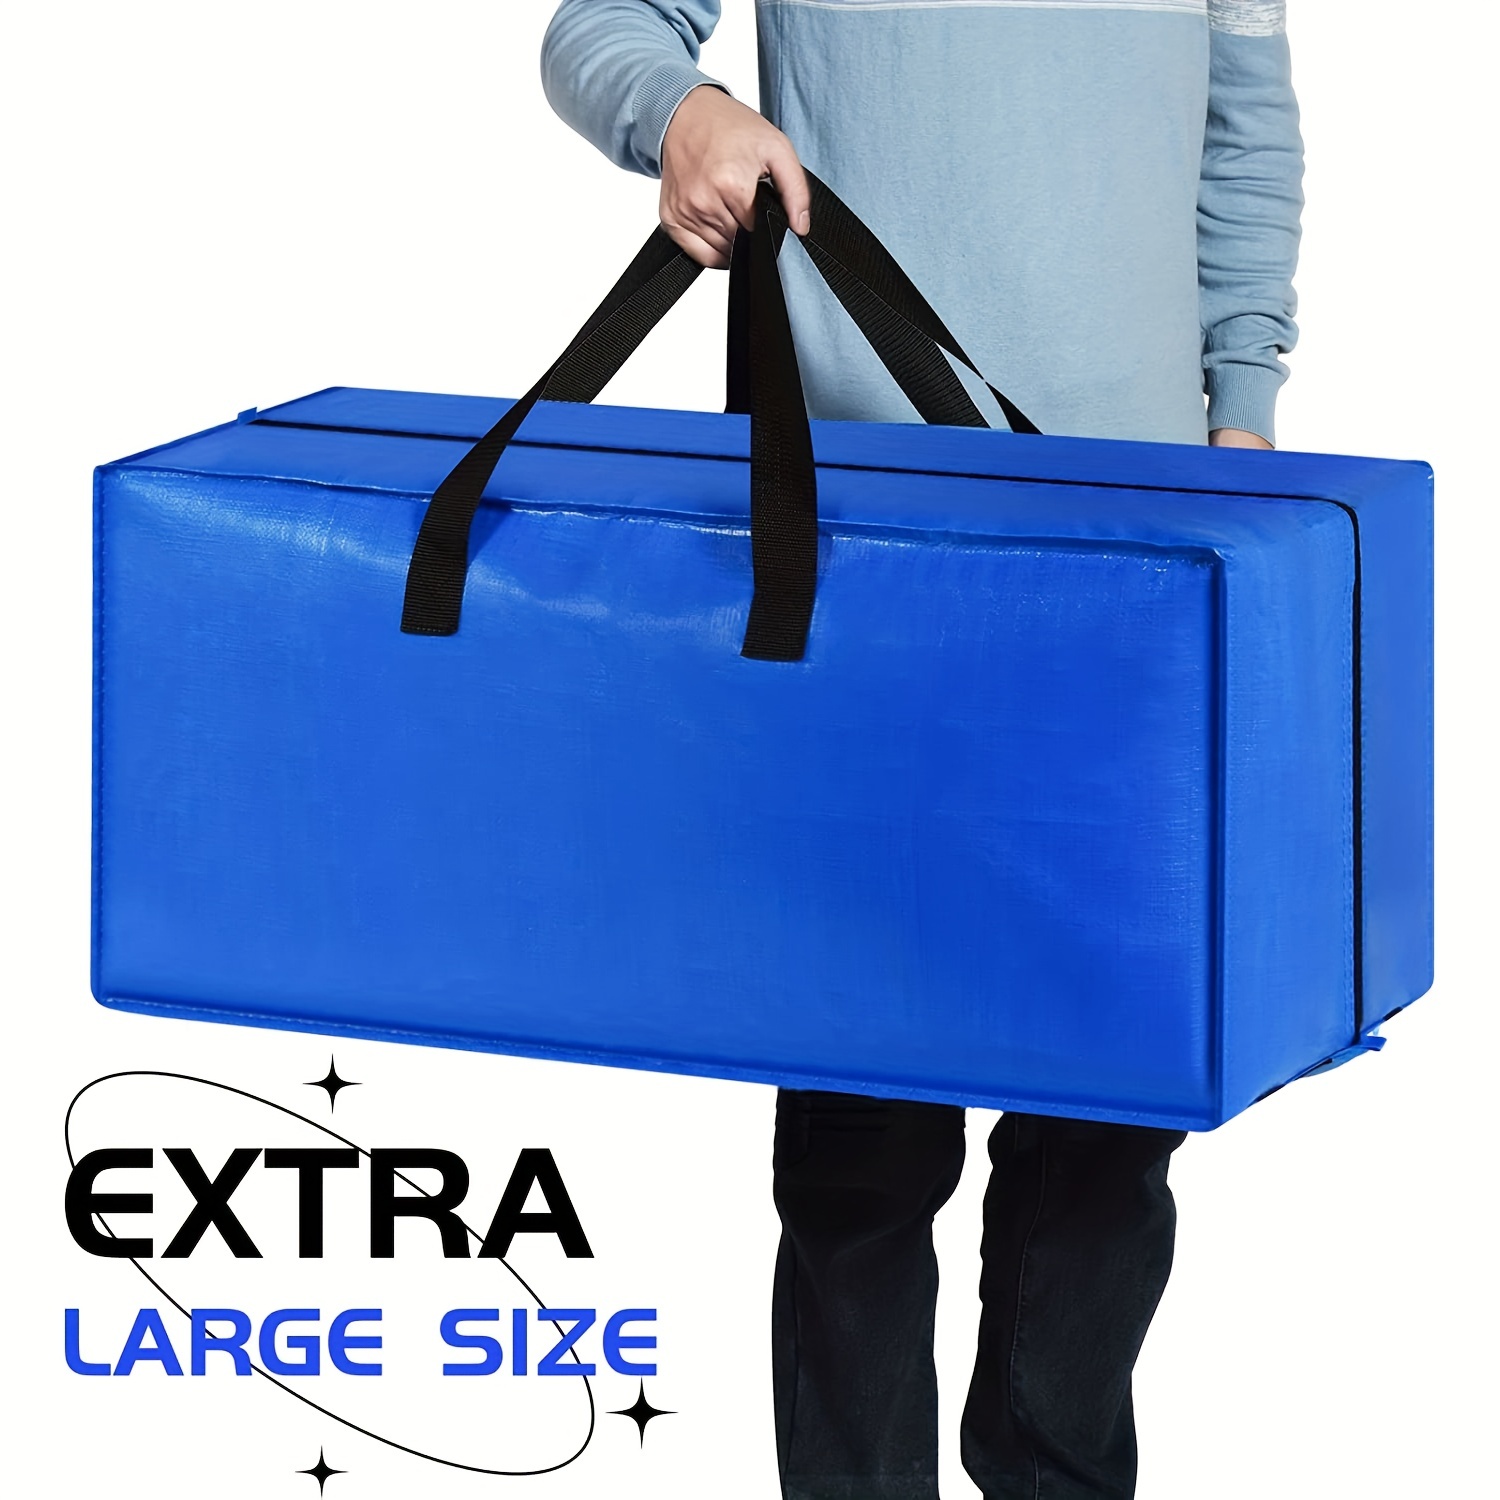 Pack of 4 Moving Bags. Extra Large Storage Bag with Backpack